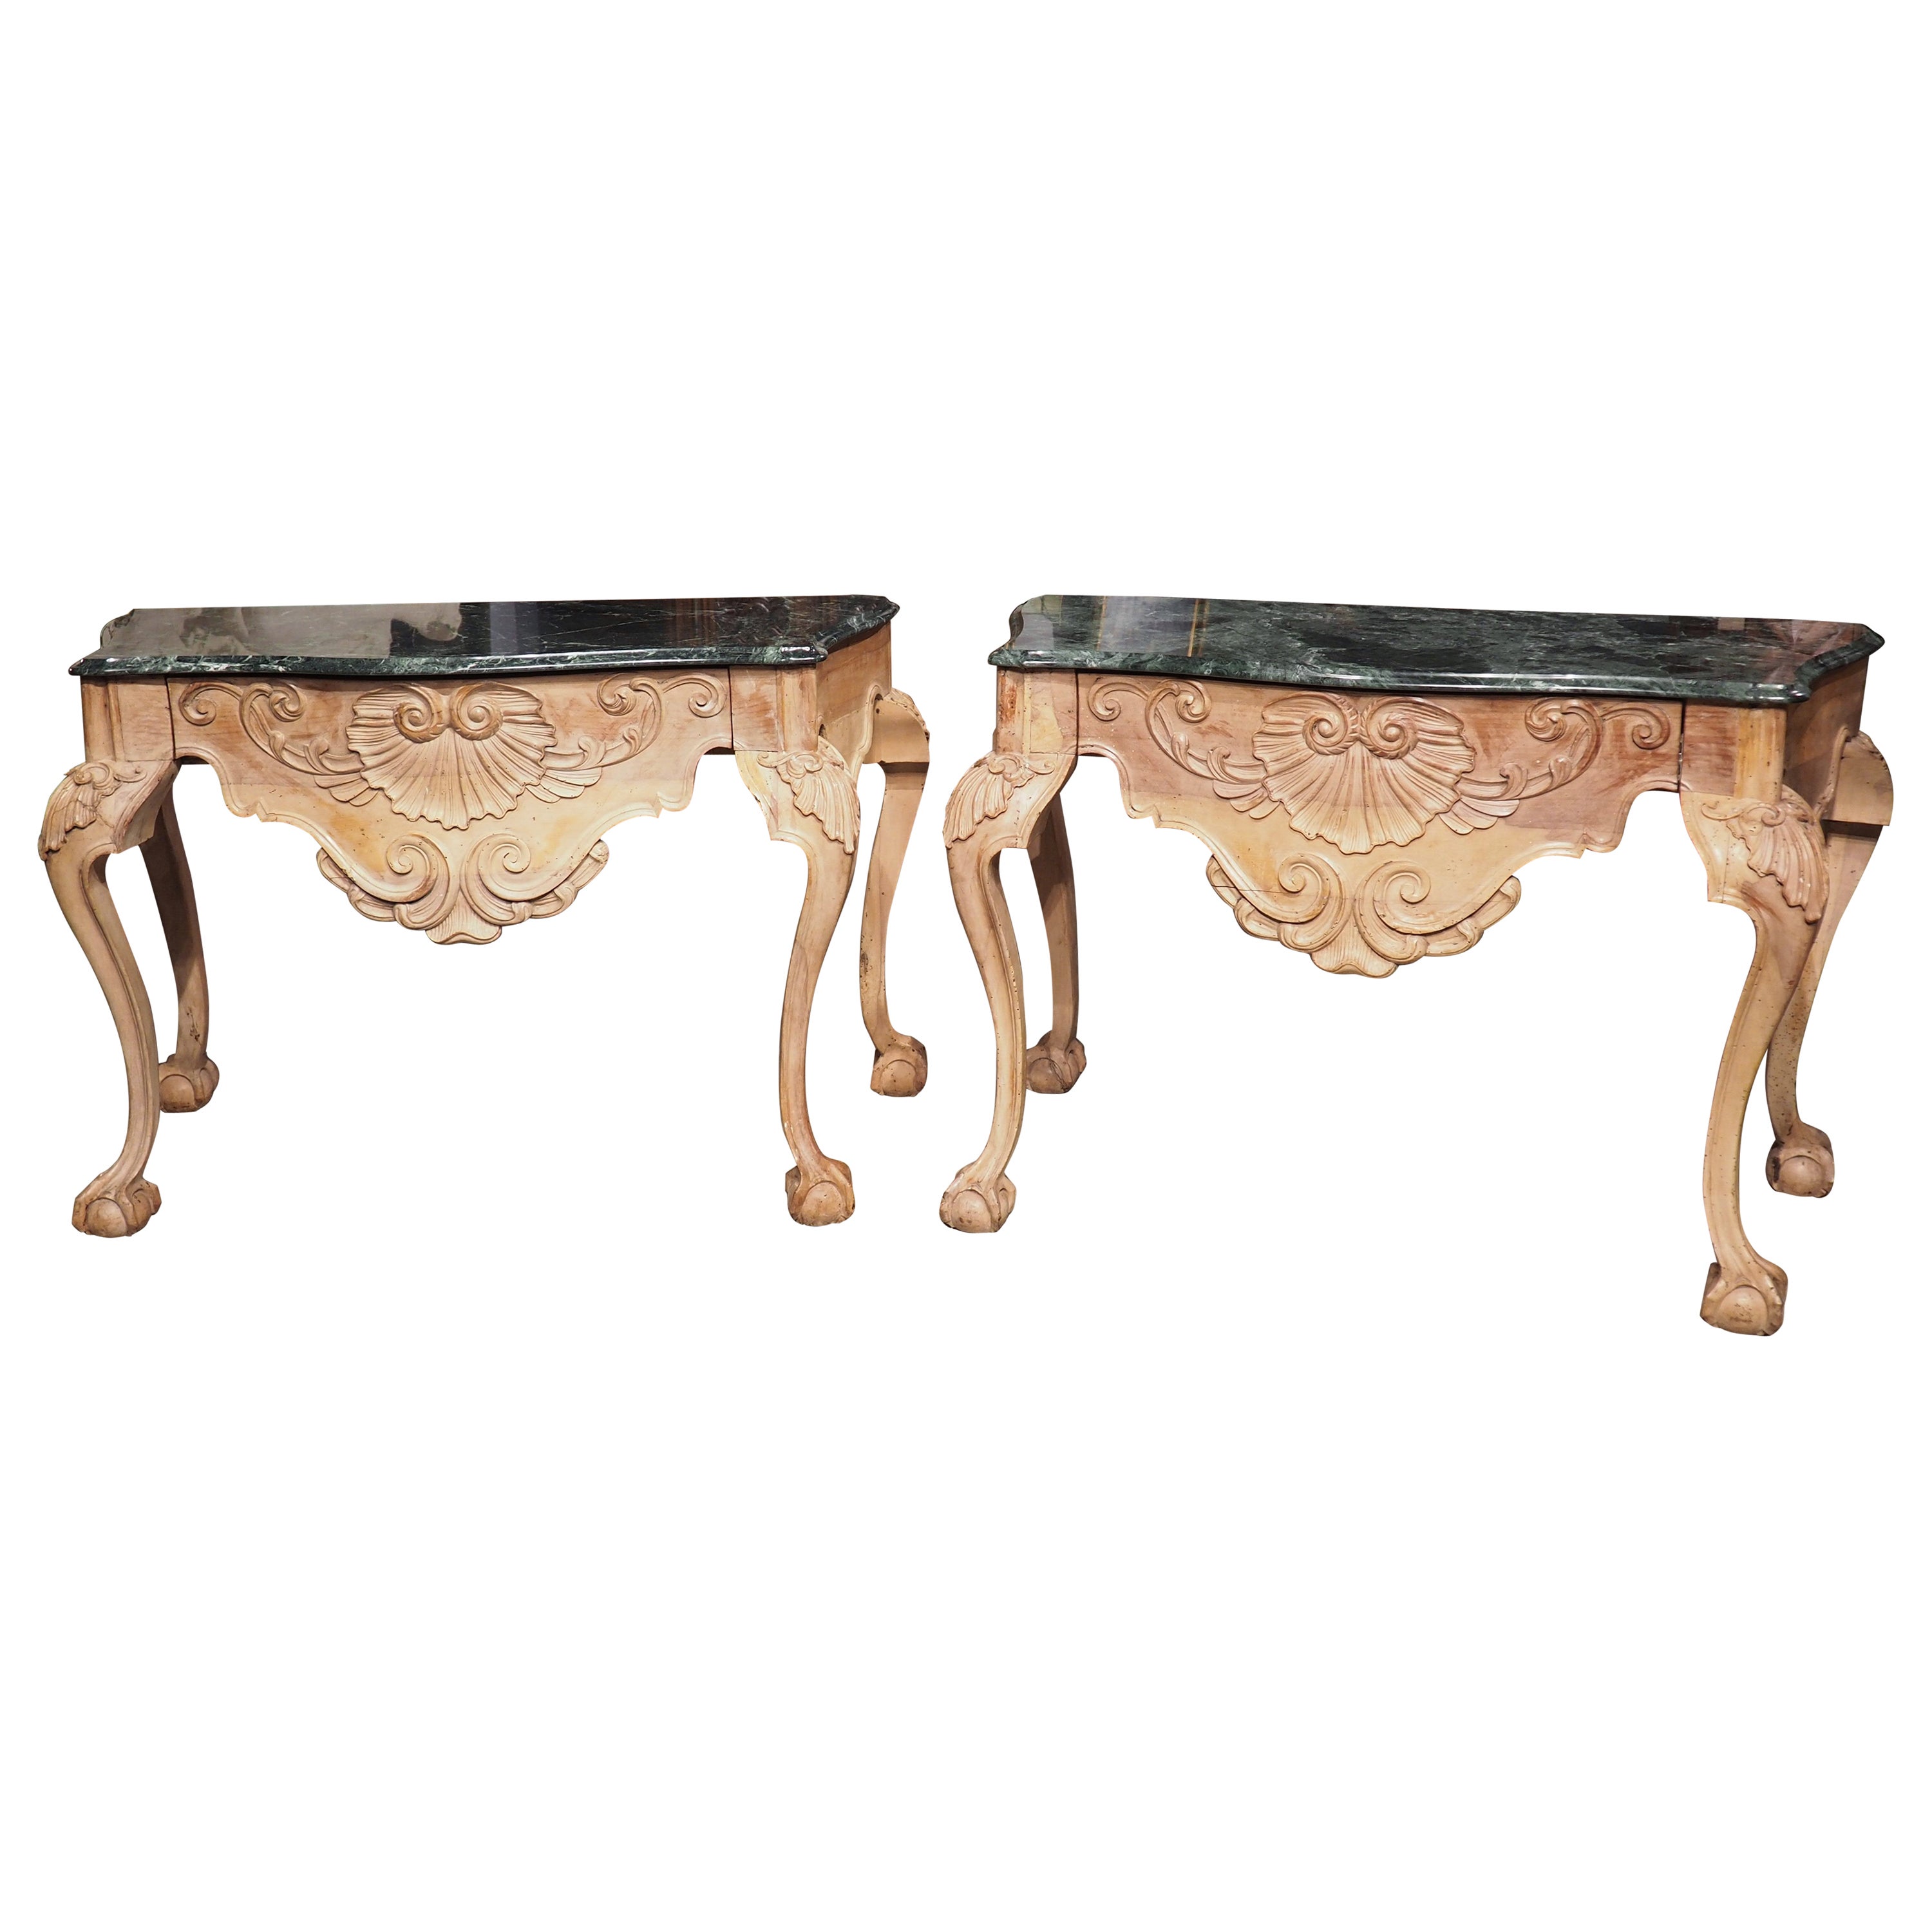 Pair of 18th Century English Ball and Claw Console Tables with Marble Tops For Sale